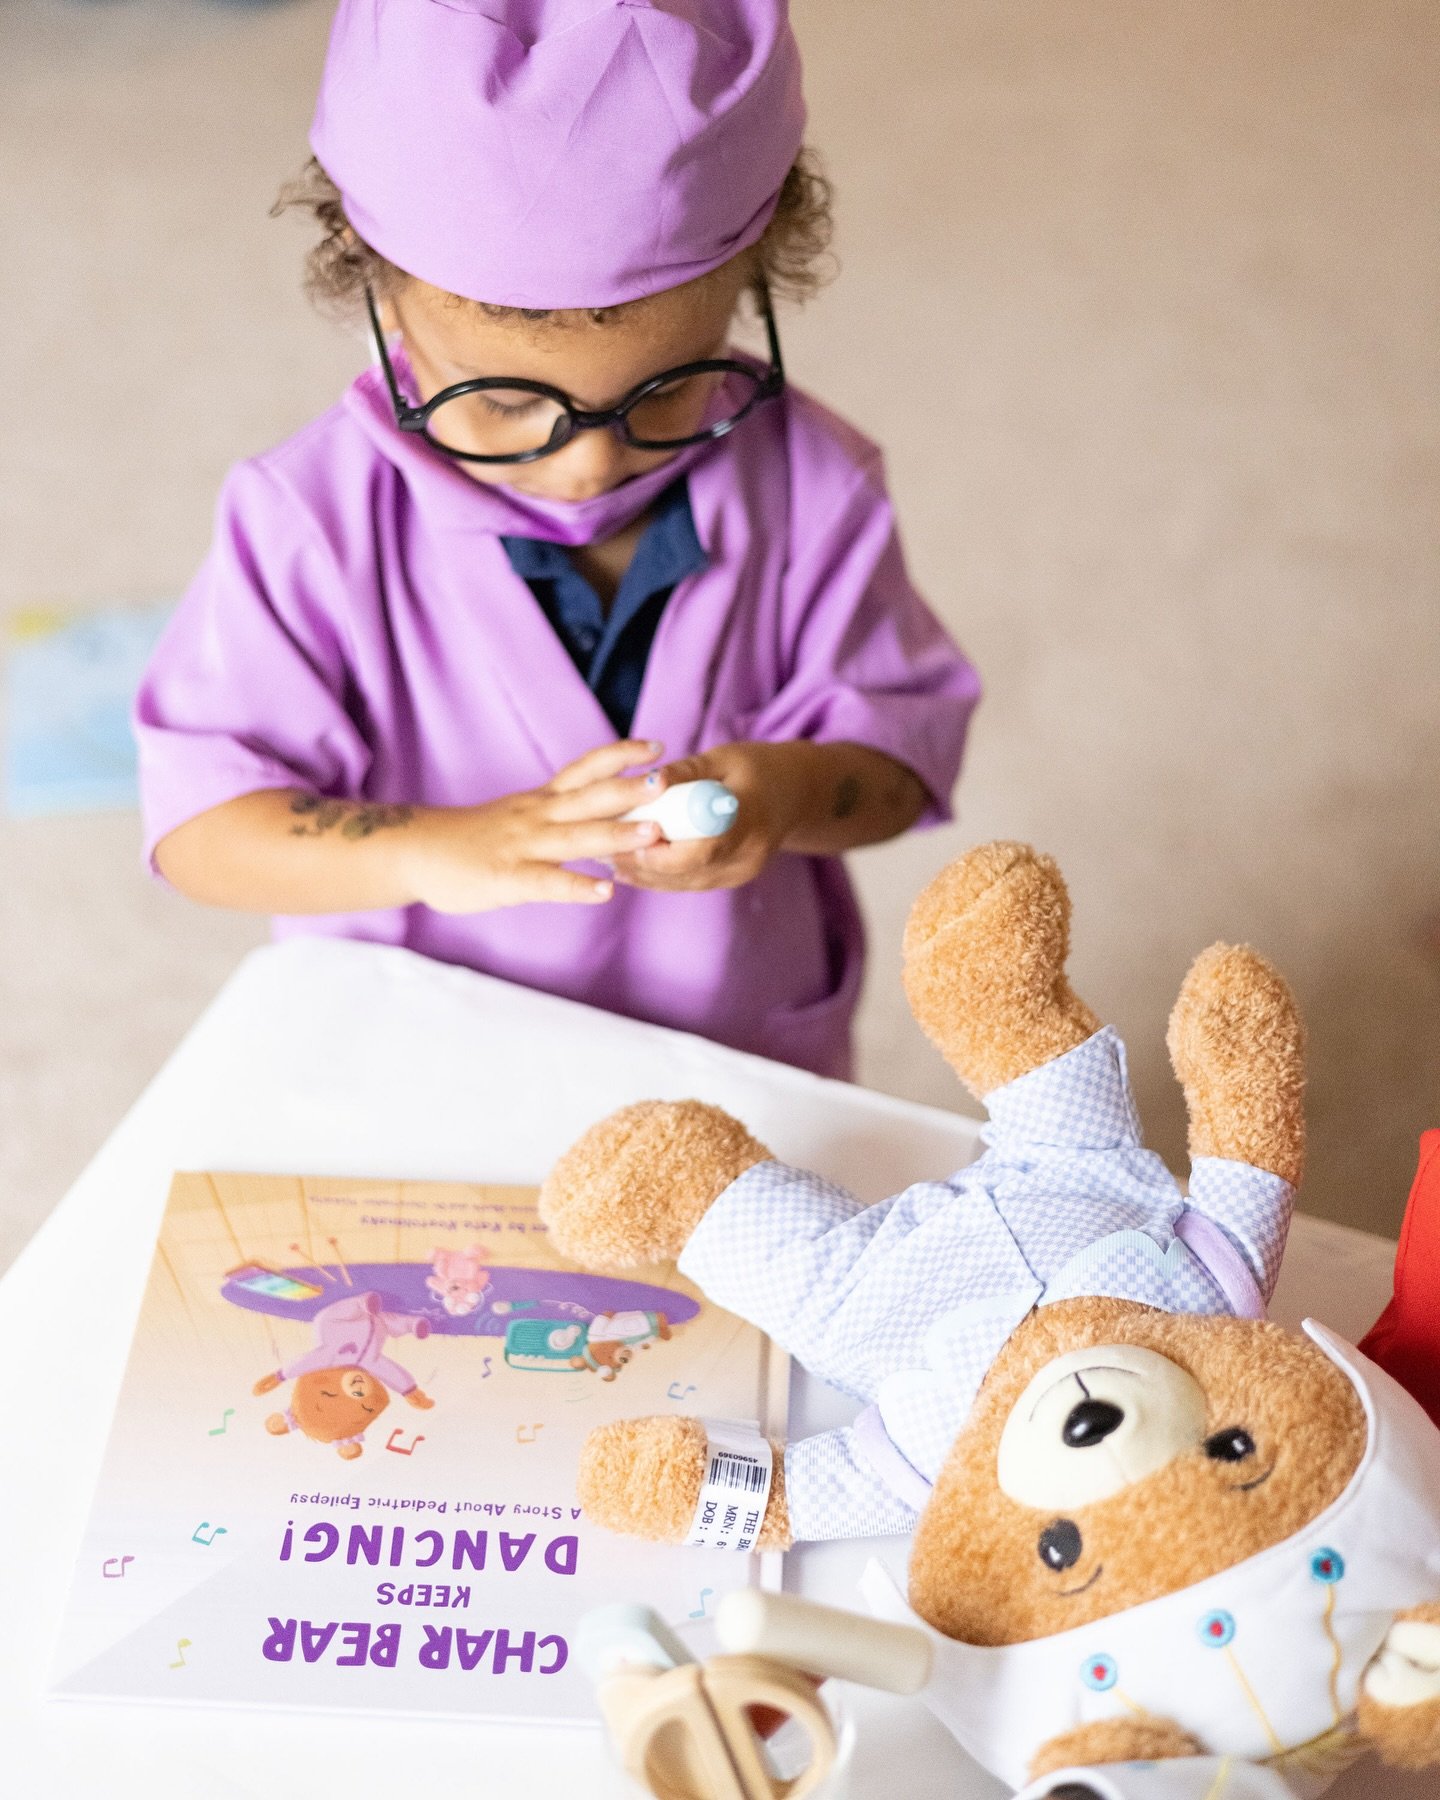 This little brother stole the show in his purple scrubs during our mini photo shoot! 🌟 

Epilepsy affects the whole family and we&rsquo;re working on a bear for super siblings (and friends, neighbors, family, classmates) to include them and introduc